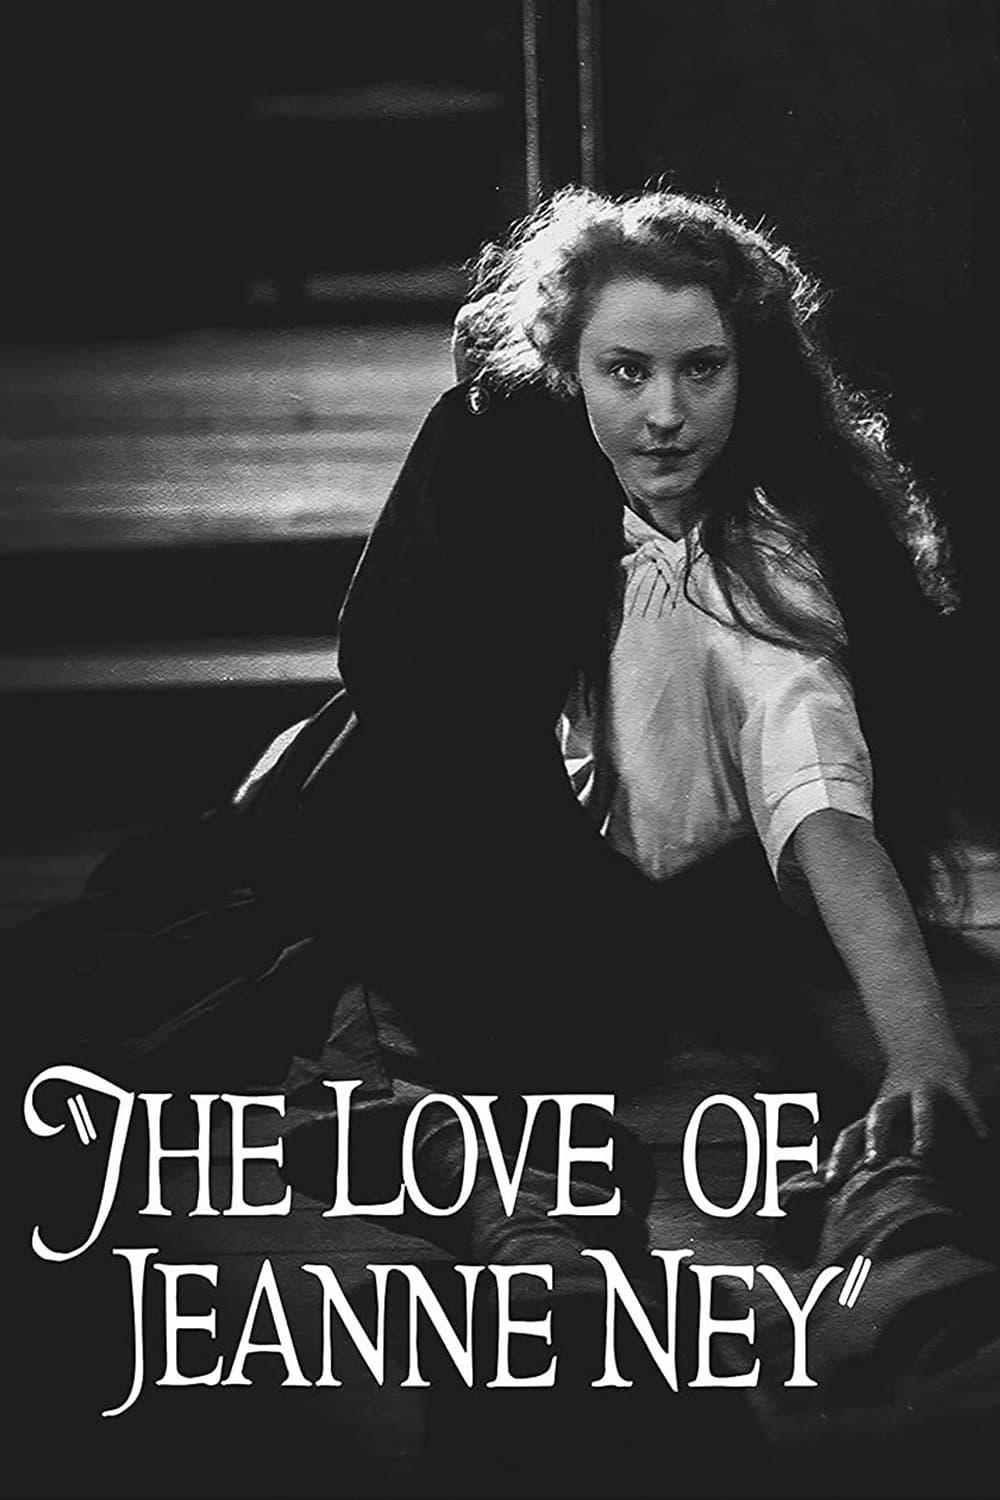 The Love of Jeanne Ney poster